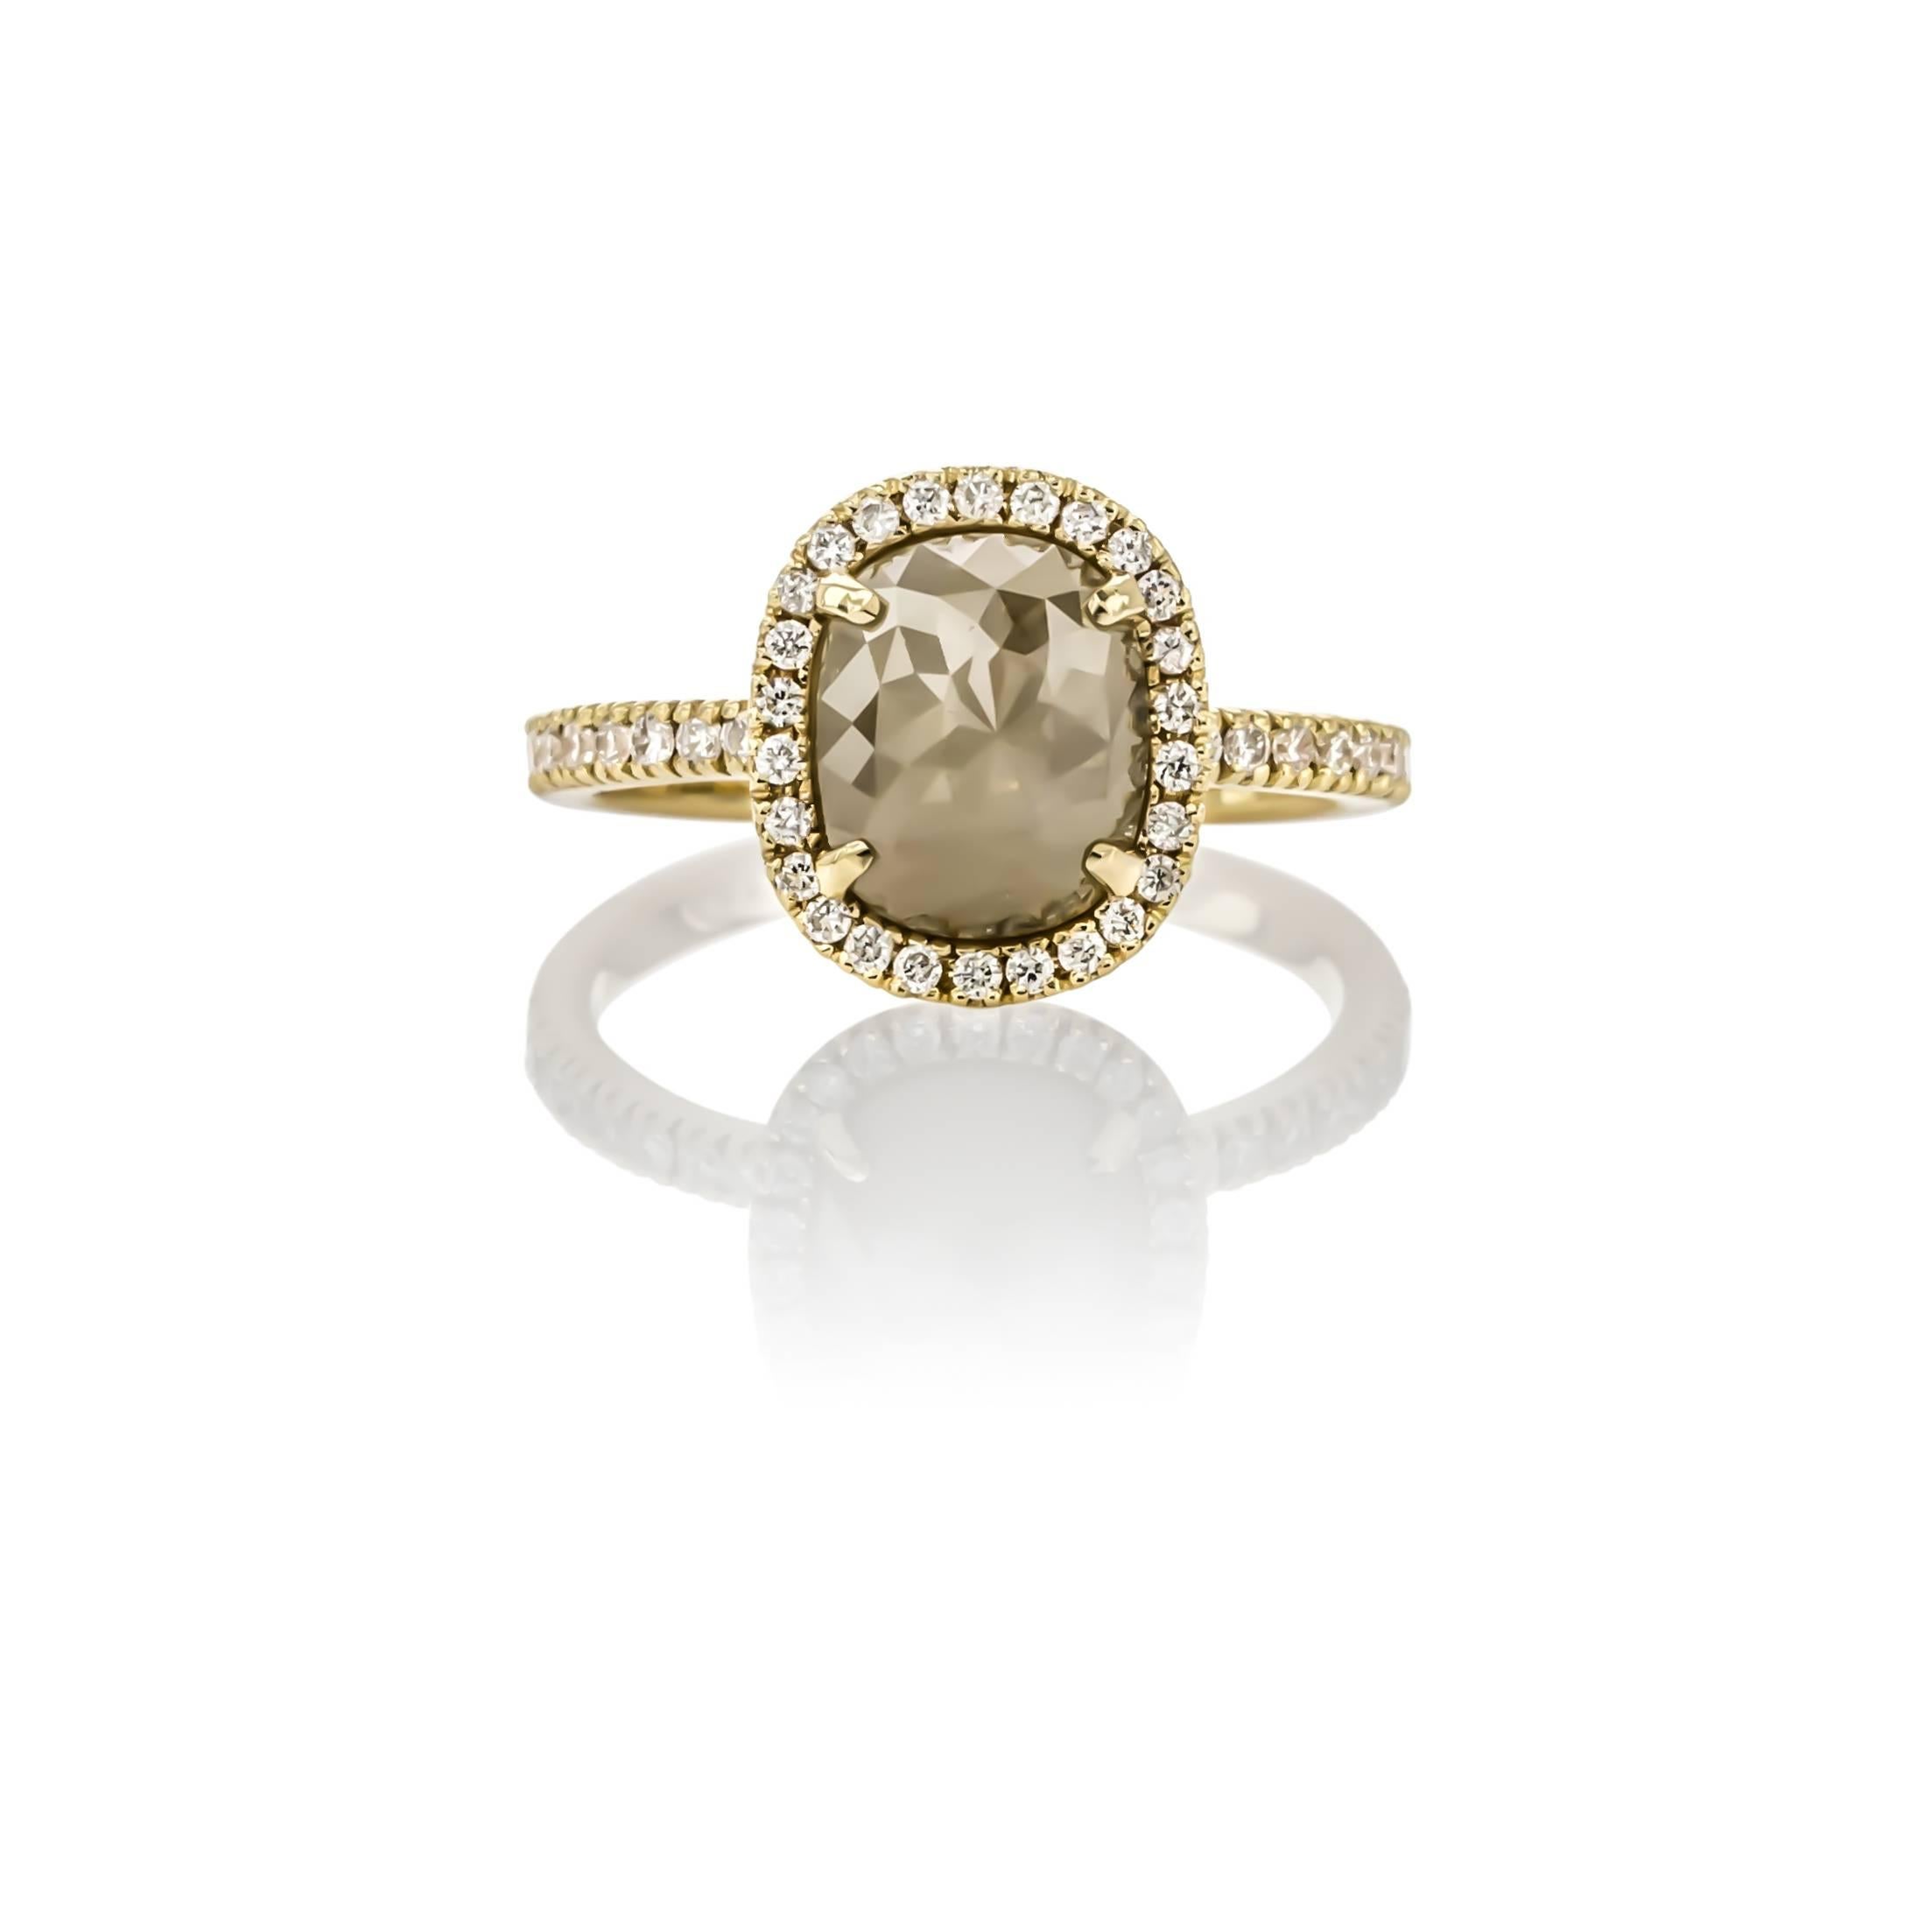 18K yellow gold opaque diamond halo ring, by Sethi Couture. Set with one faceted oval shape opaque diamond weighing 2.37 carats, surrounded by round diamonds weighing .34 carats total weight.

Finger size 6.25, can be re-sized.